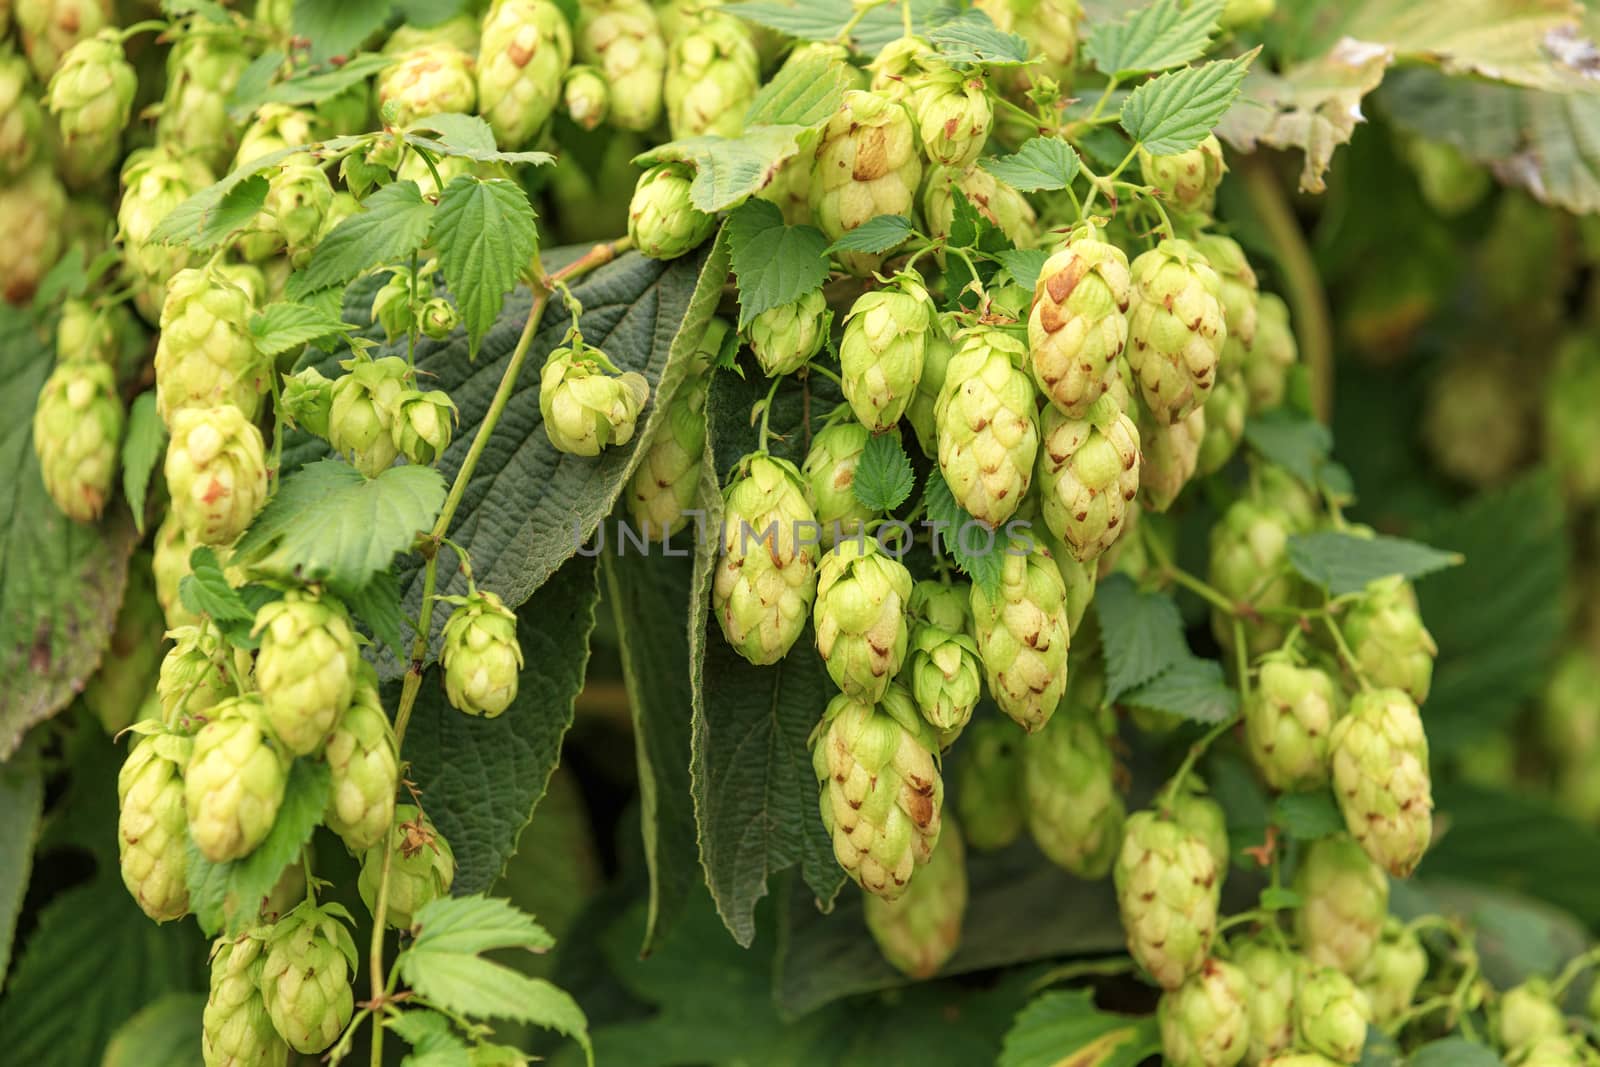 Ripe cones of fragrant hops hang down in dense clusters close up.